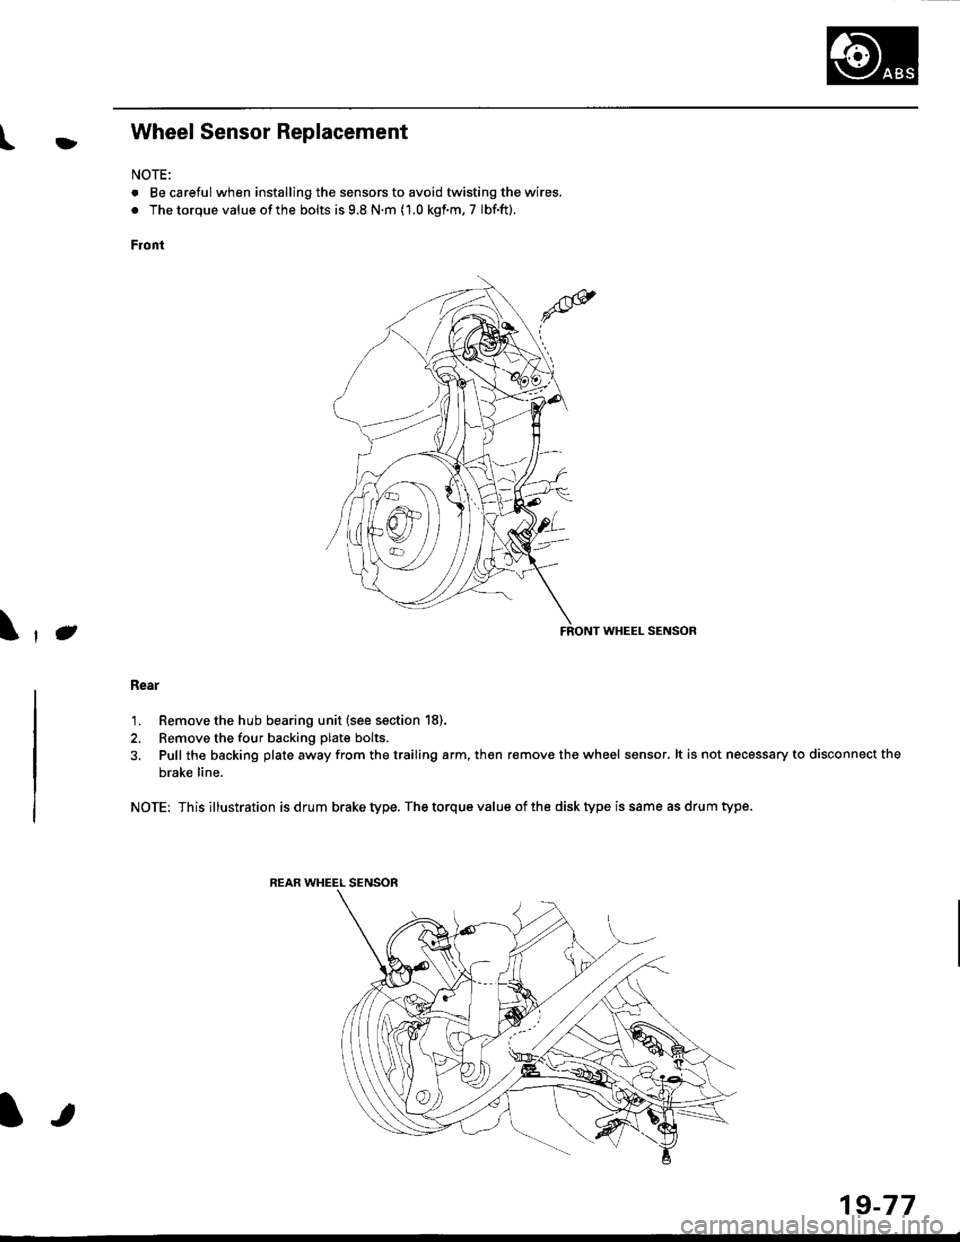 HONDA CIVIC 1996 6.G Owners Guide l}tWheel Sensor Replacement
NOTE:
. Becareful when installingthe sensors to avoid twisting the wires.
. The torque value of the bolts is 9.8 N.m (1.0 kgf.m, 7 lbf.ft).
Front
FRONT WHEEL SENSOR
Rear
1.